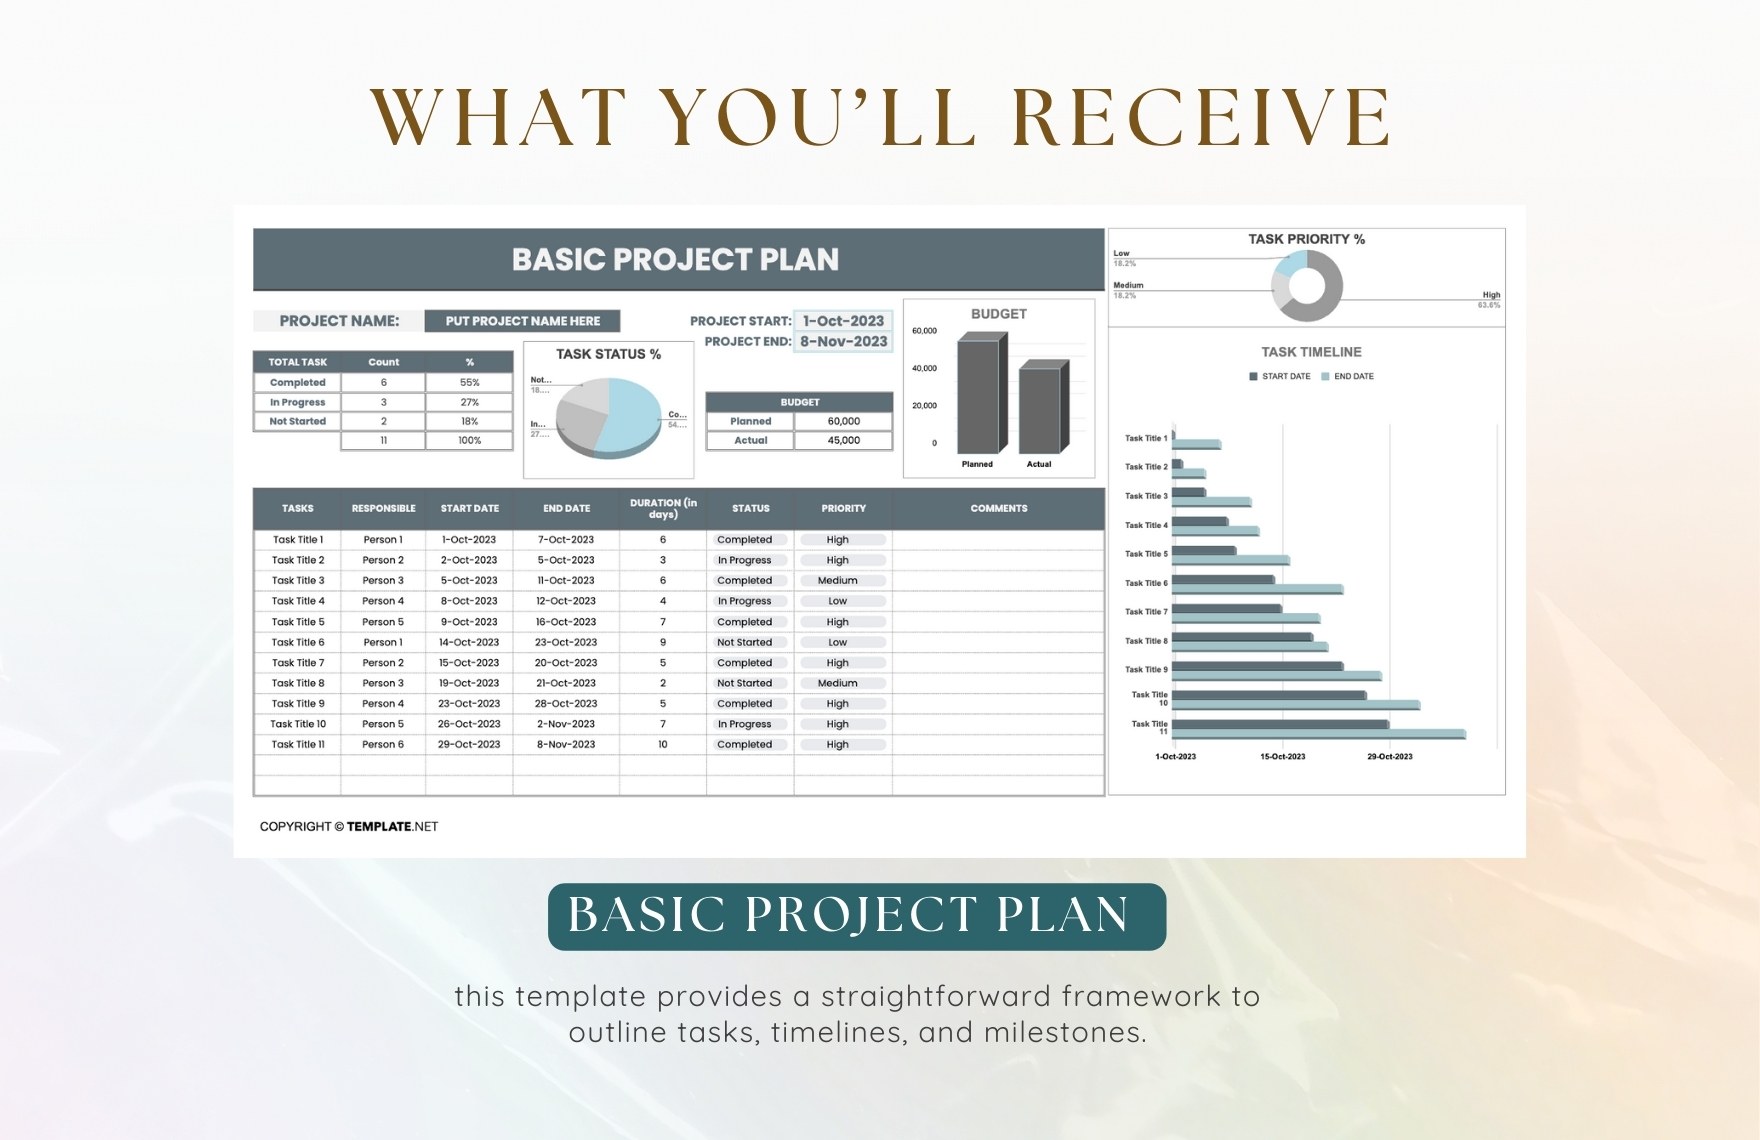 Basic Project Plan Template